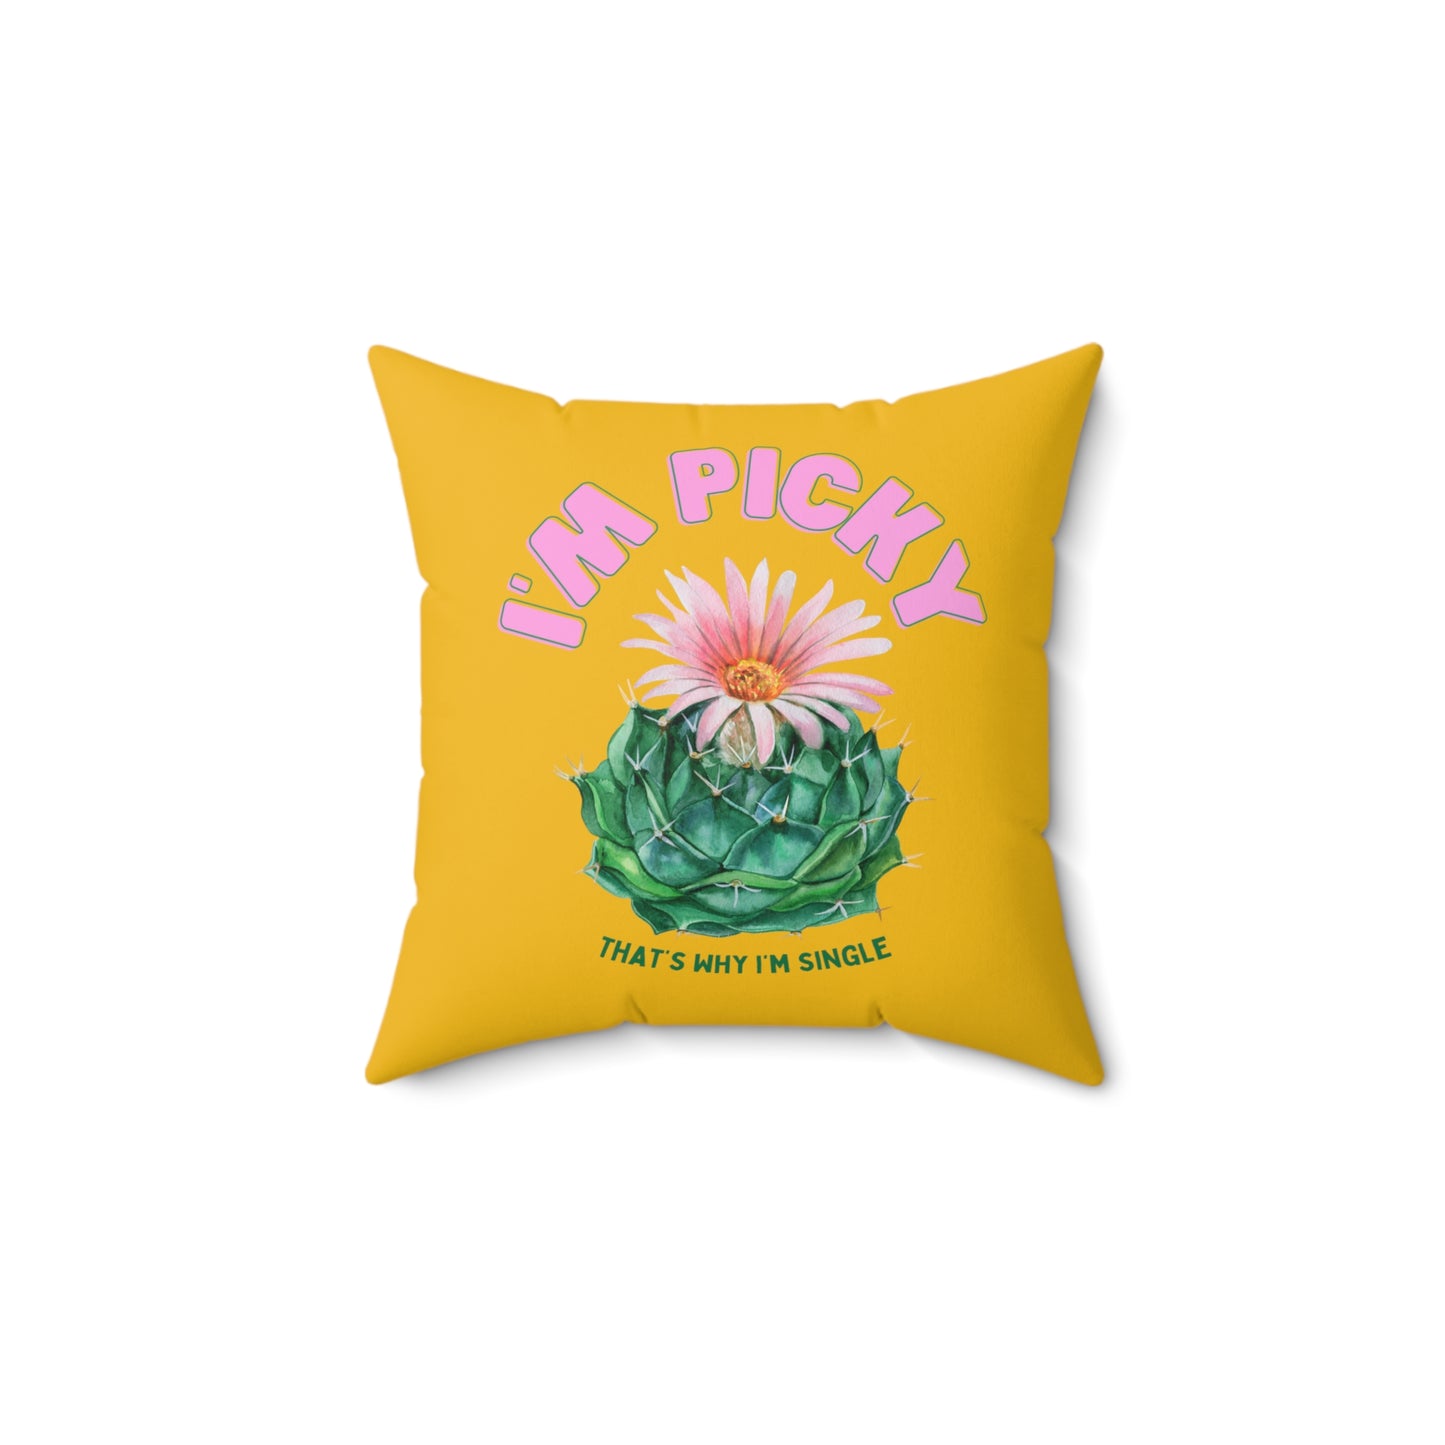 "I'm Picky" Throw Pillow